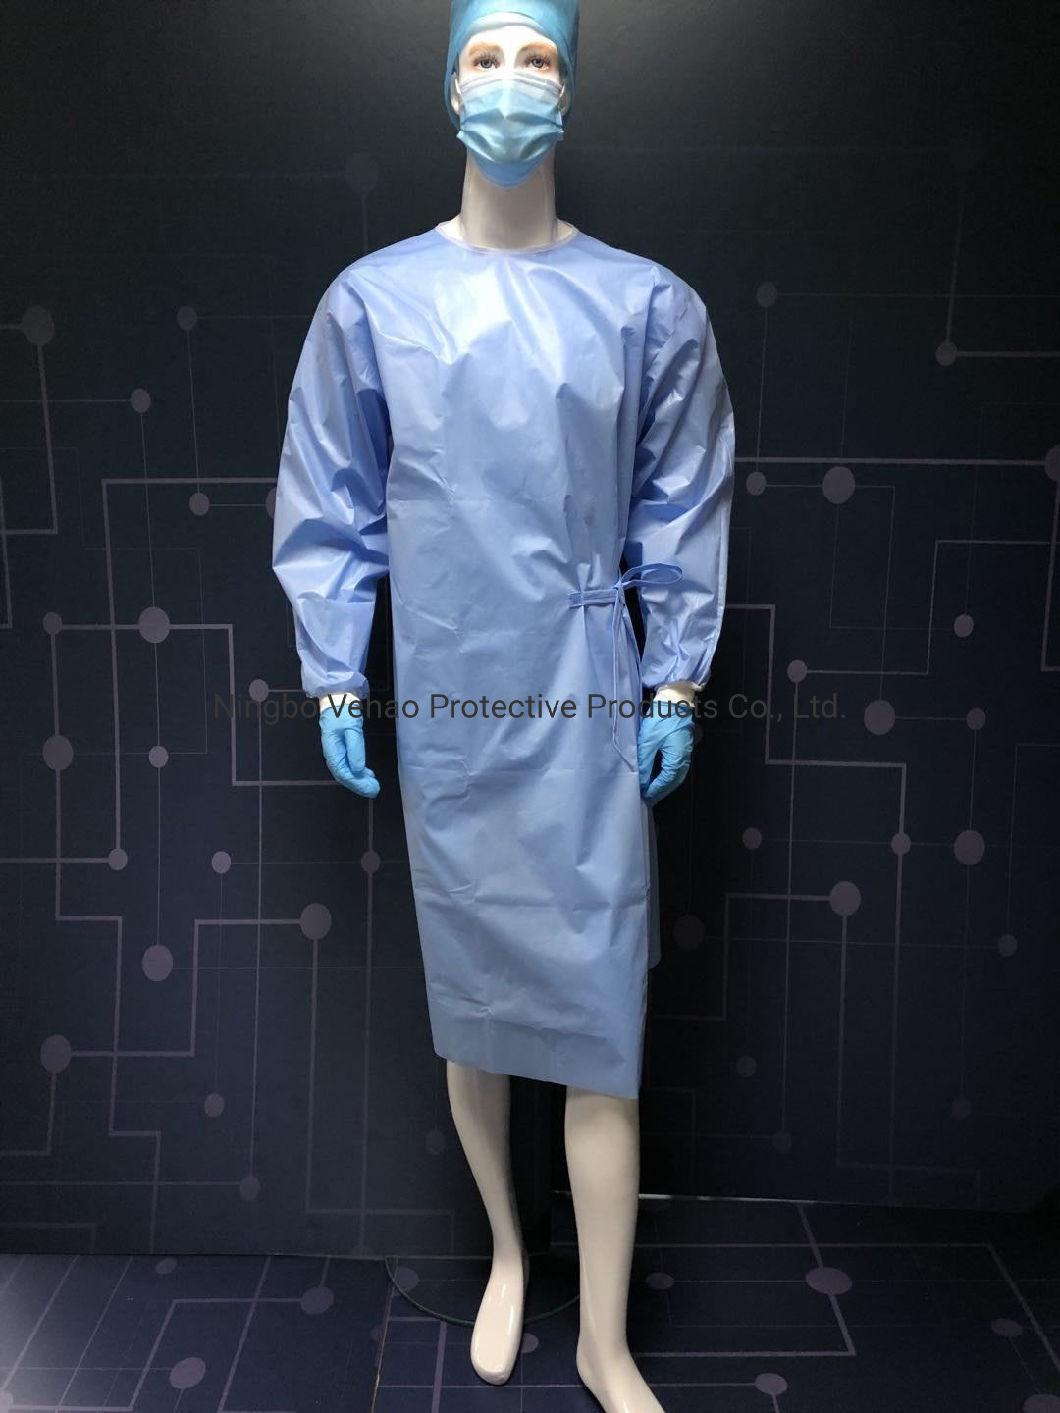 Level 2 Sterilized Surgical Gown with Coating Dfco-0140